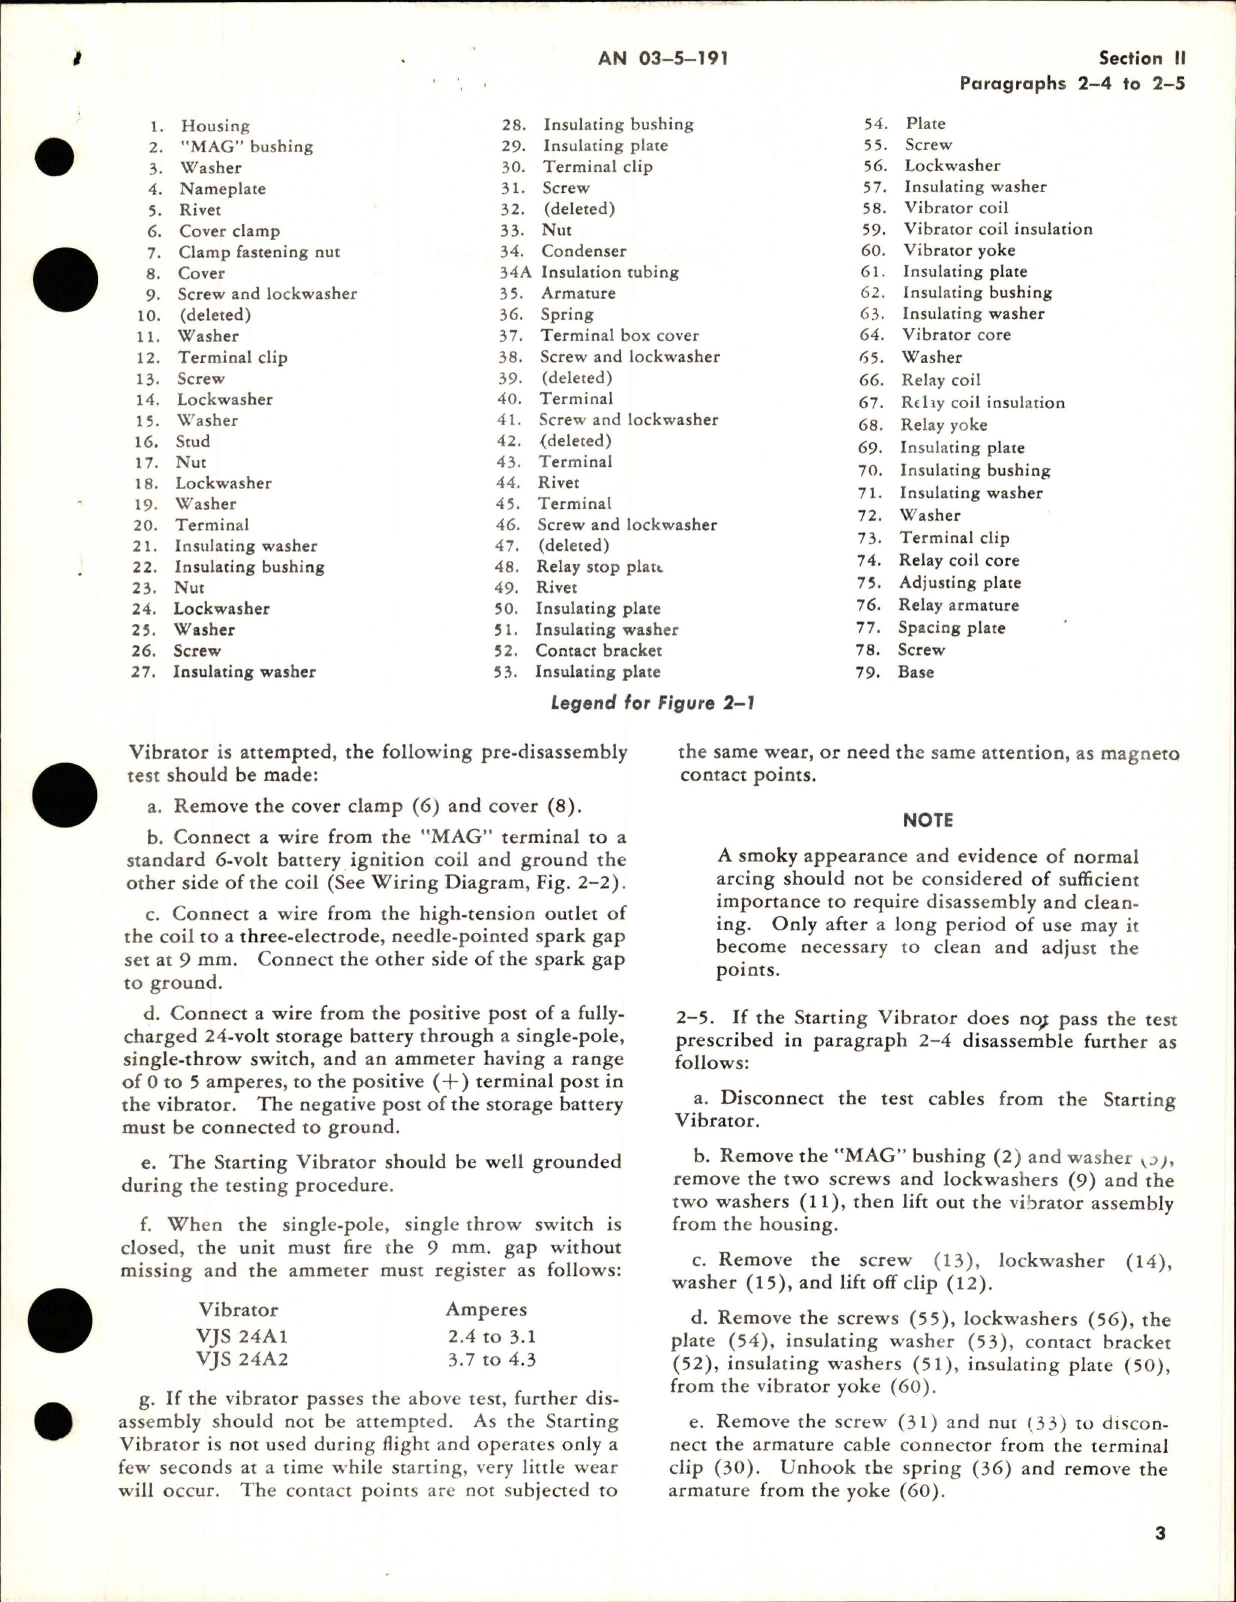 Sample page 5 from AirCorps Library document: Overhaul Instructions for Starting Vibrator - Models VJS24A1 and VJS24A2